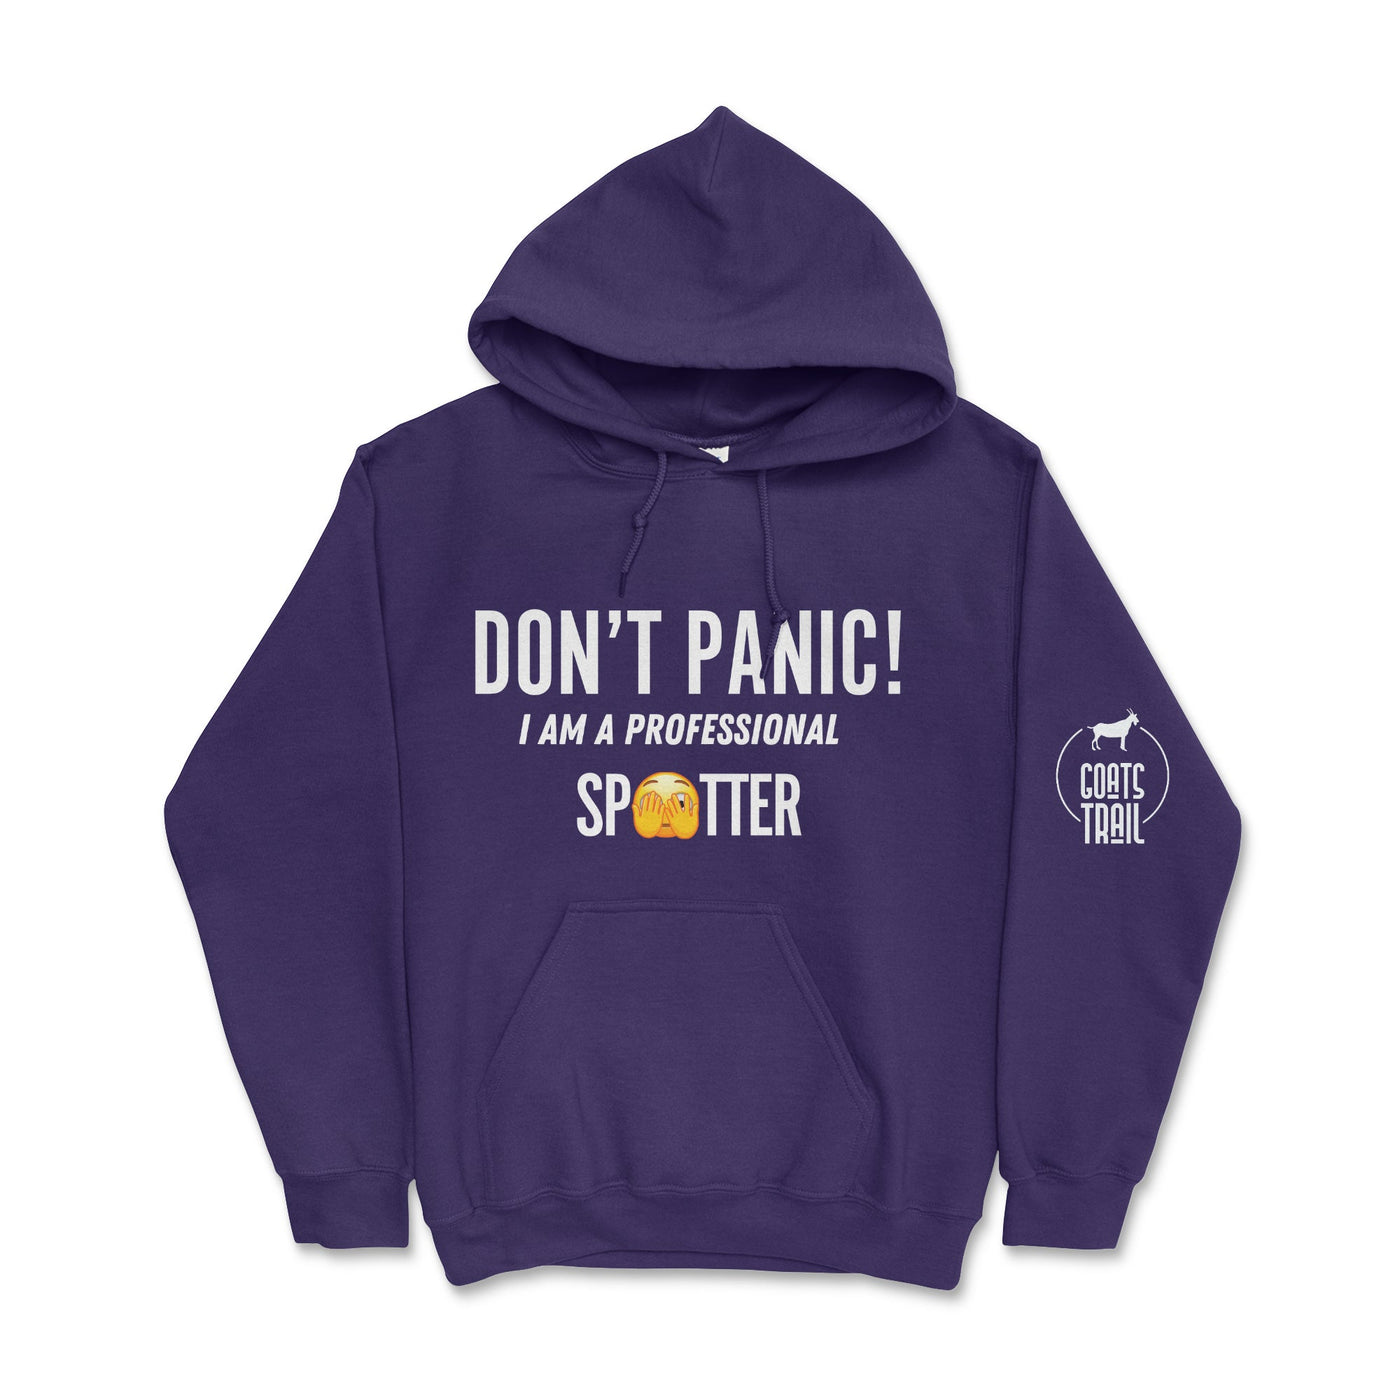 Don't Panic! I Am A Professional Spotter Hoodie - Goats Trail Off-Road Apparel Company